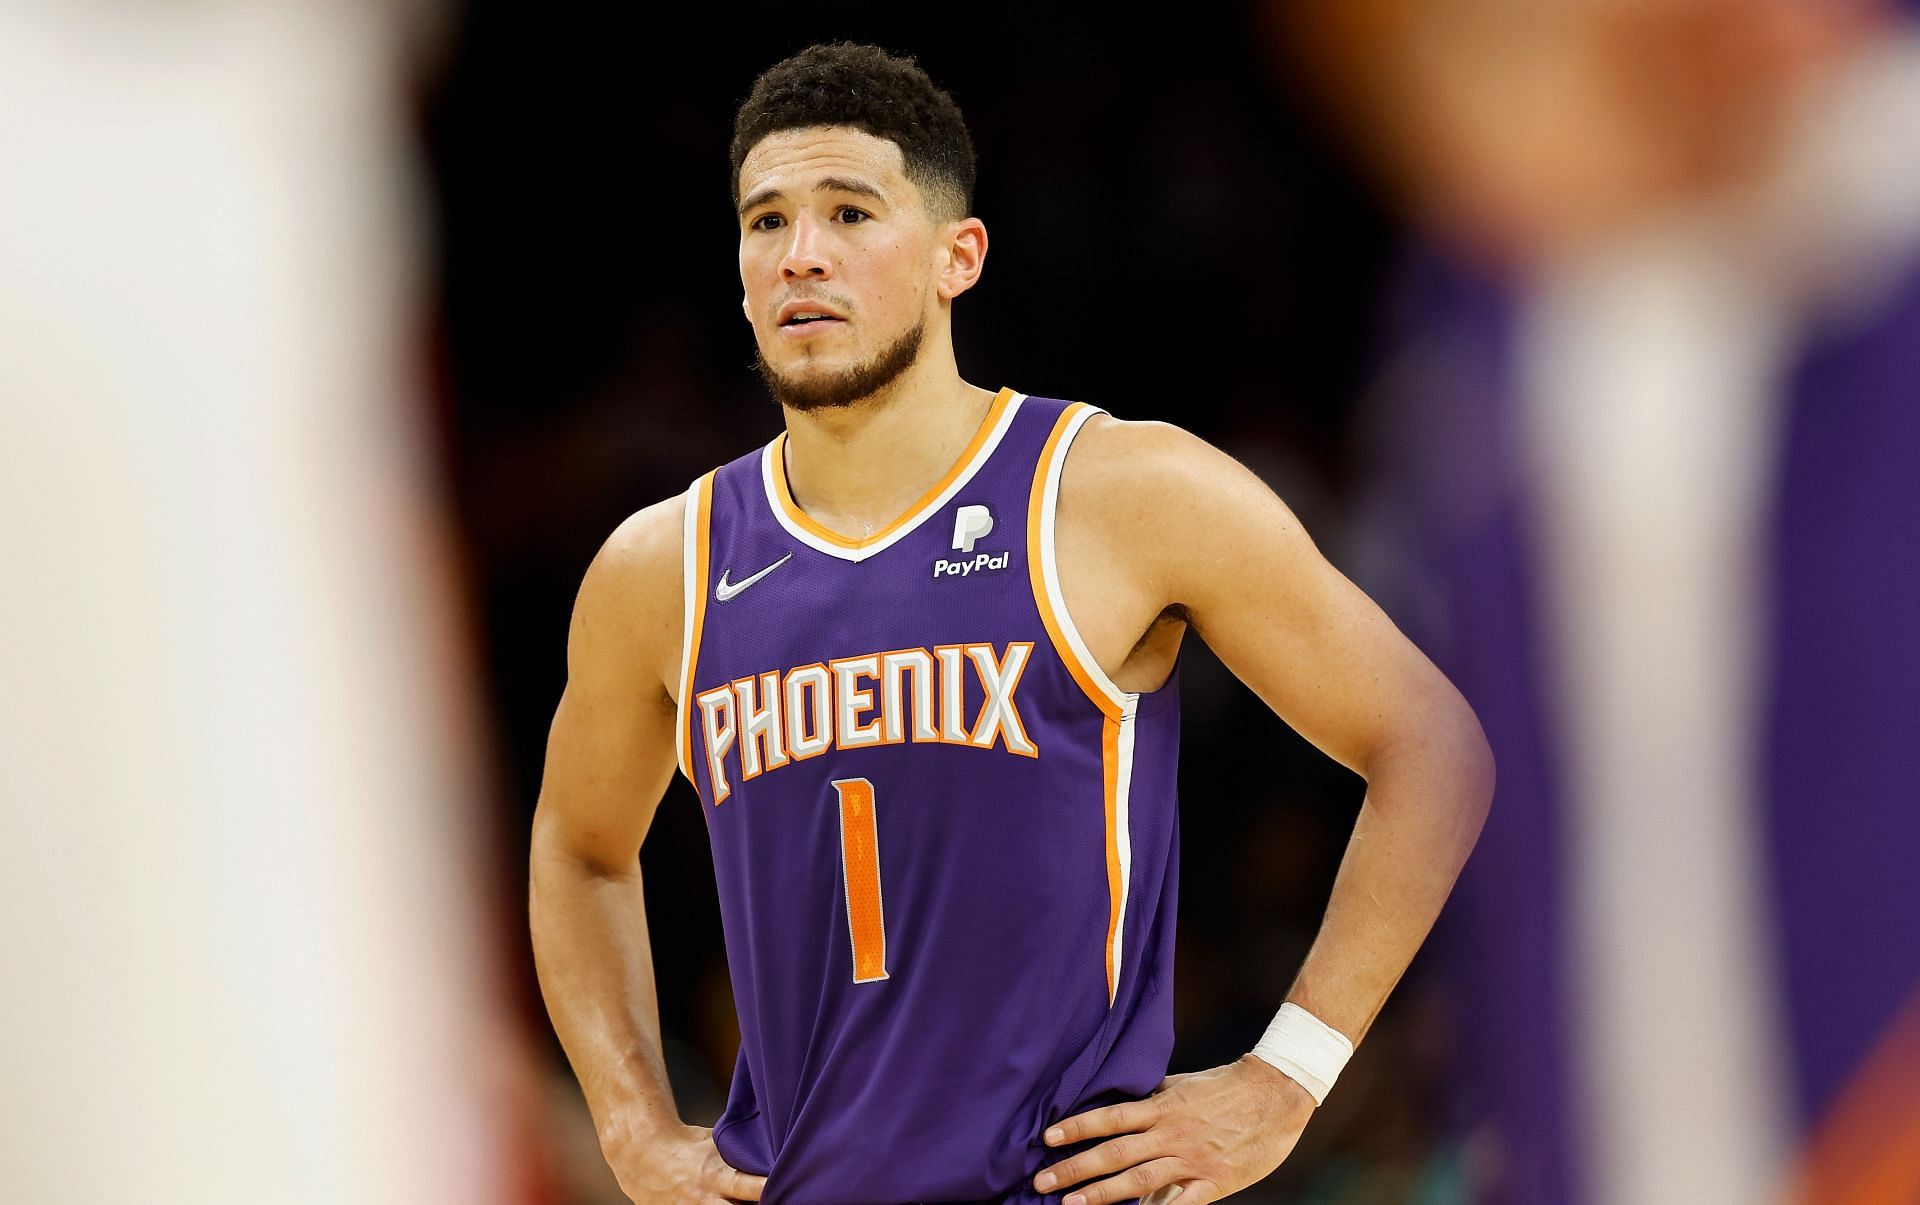 Devin Booker has missed the last four games for the Phoenix Suns